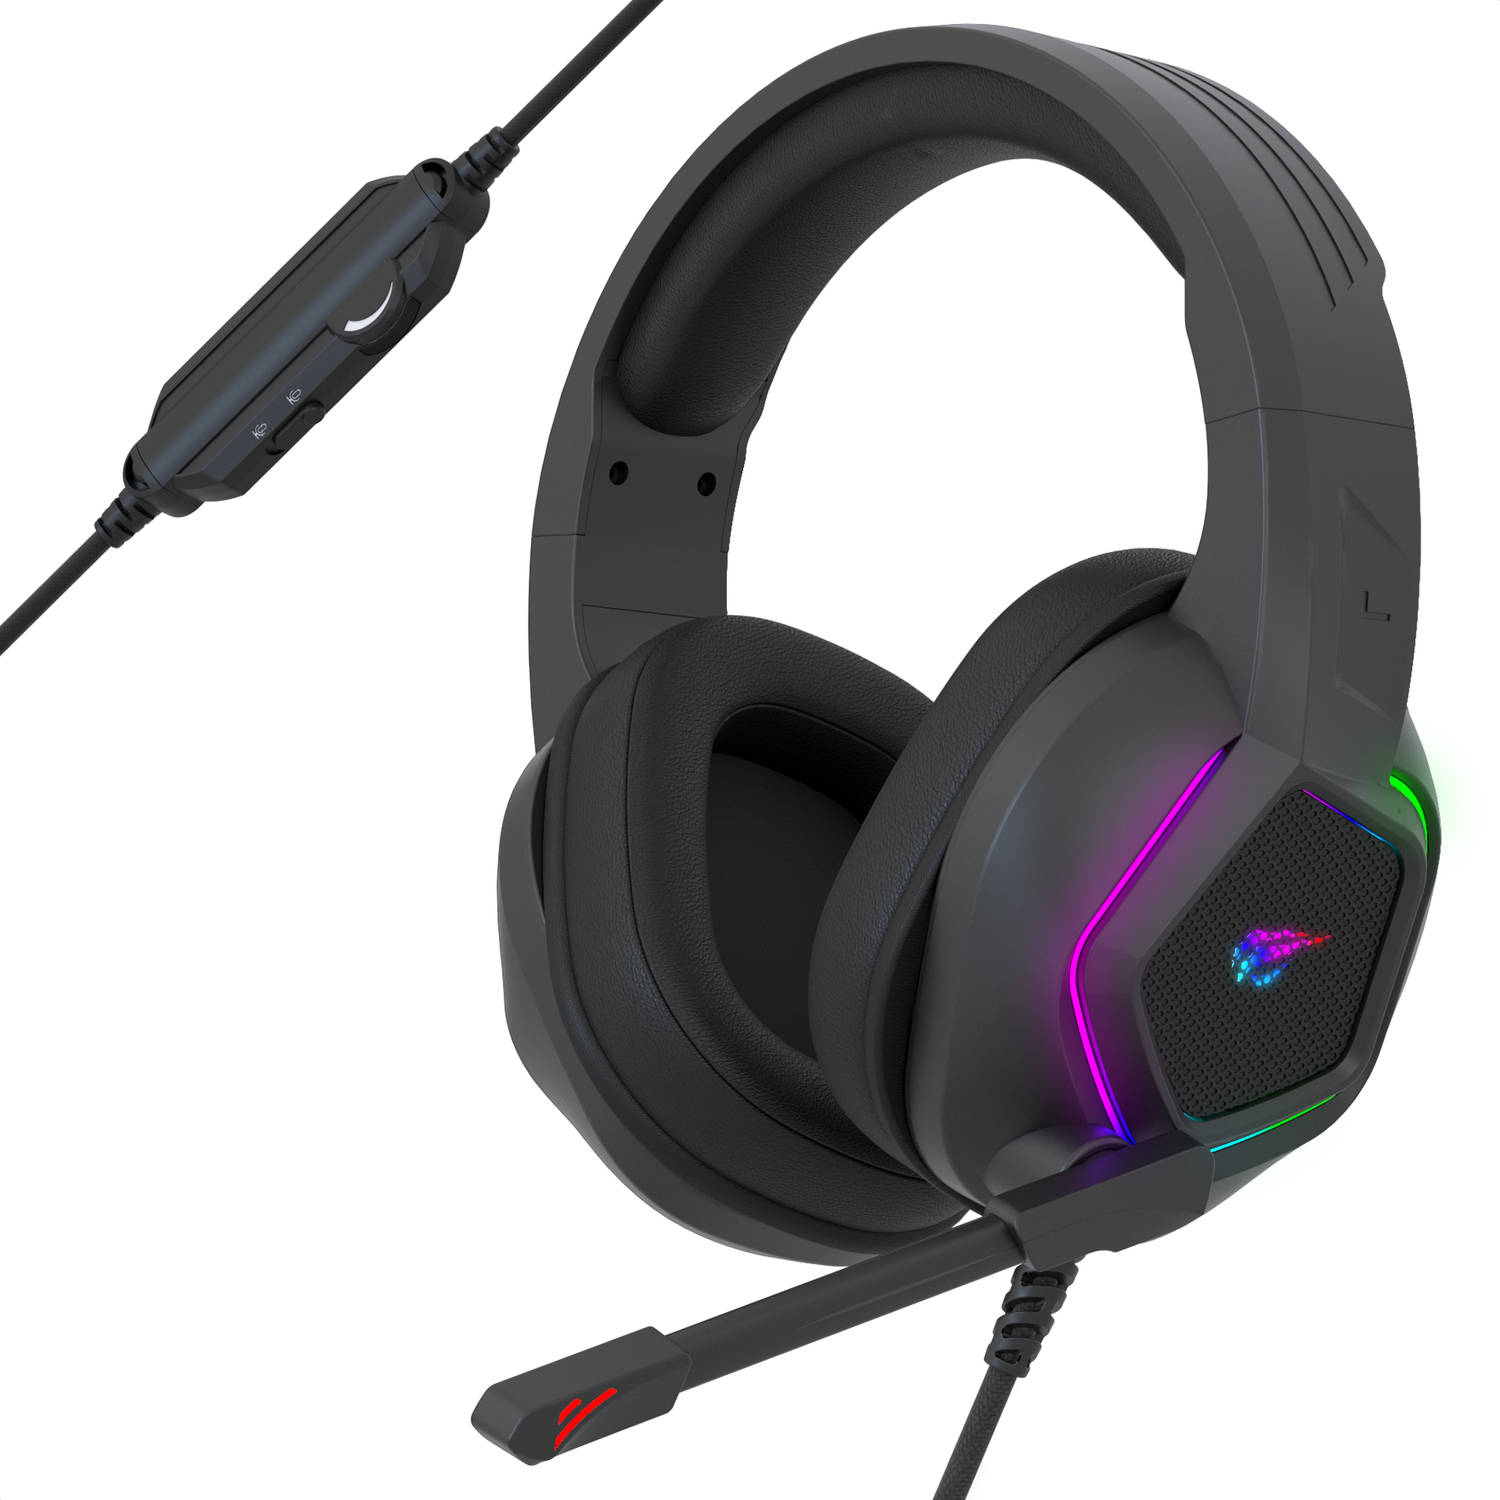 Strex Gaming Headset met Microfoon & RGB Verlichting 7.1 Surround Sound PC-PS4-PS5-XBOX-Switch